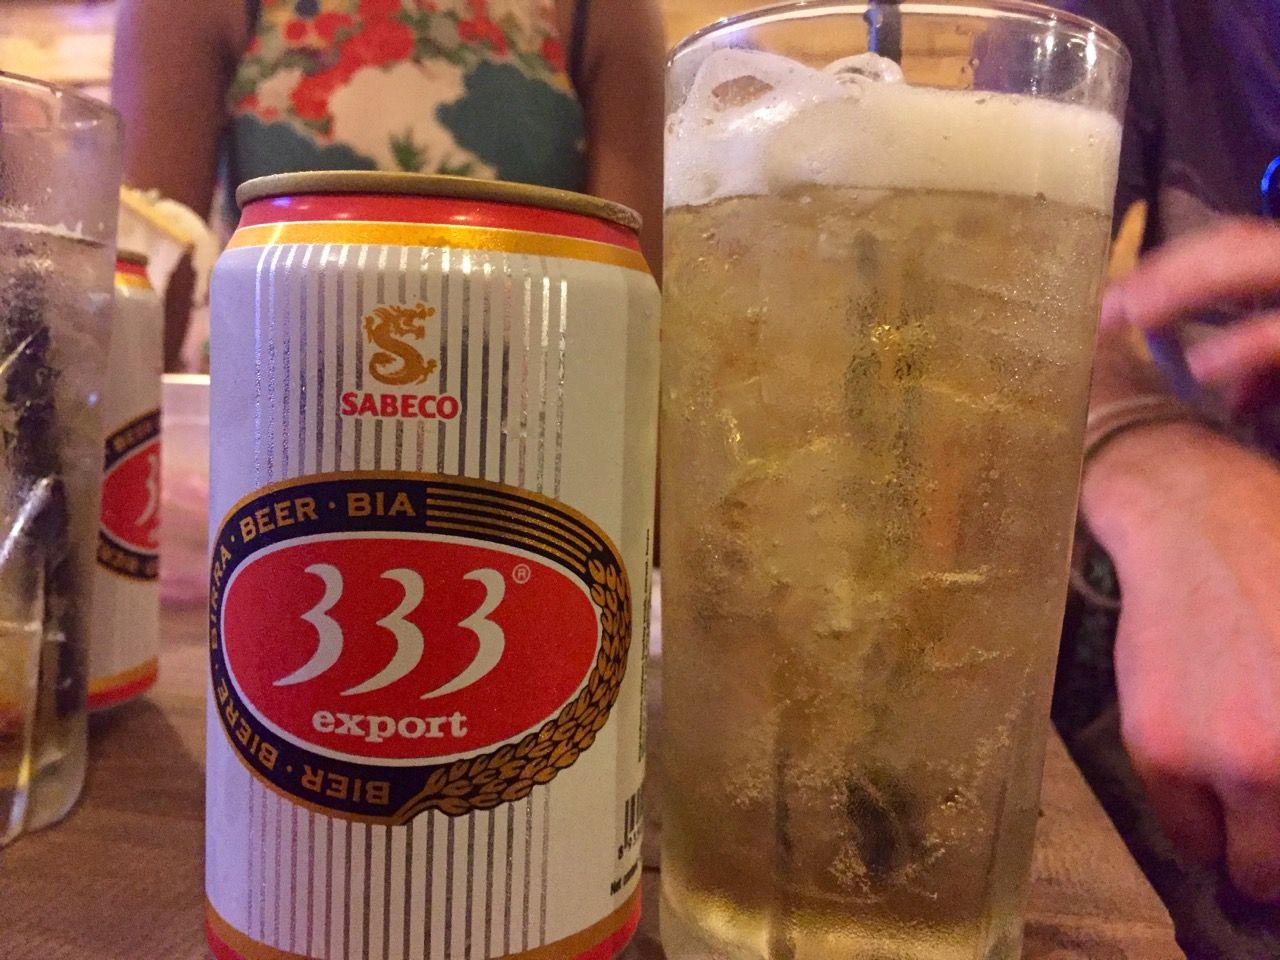 333 Export beer, and a glass filled with iced beer.